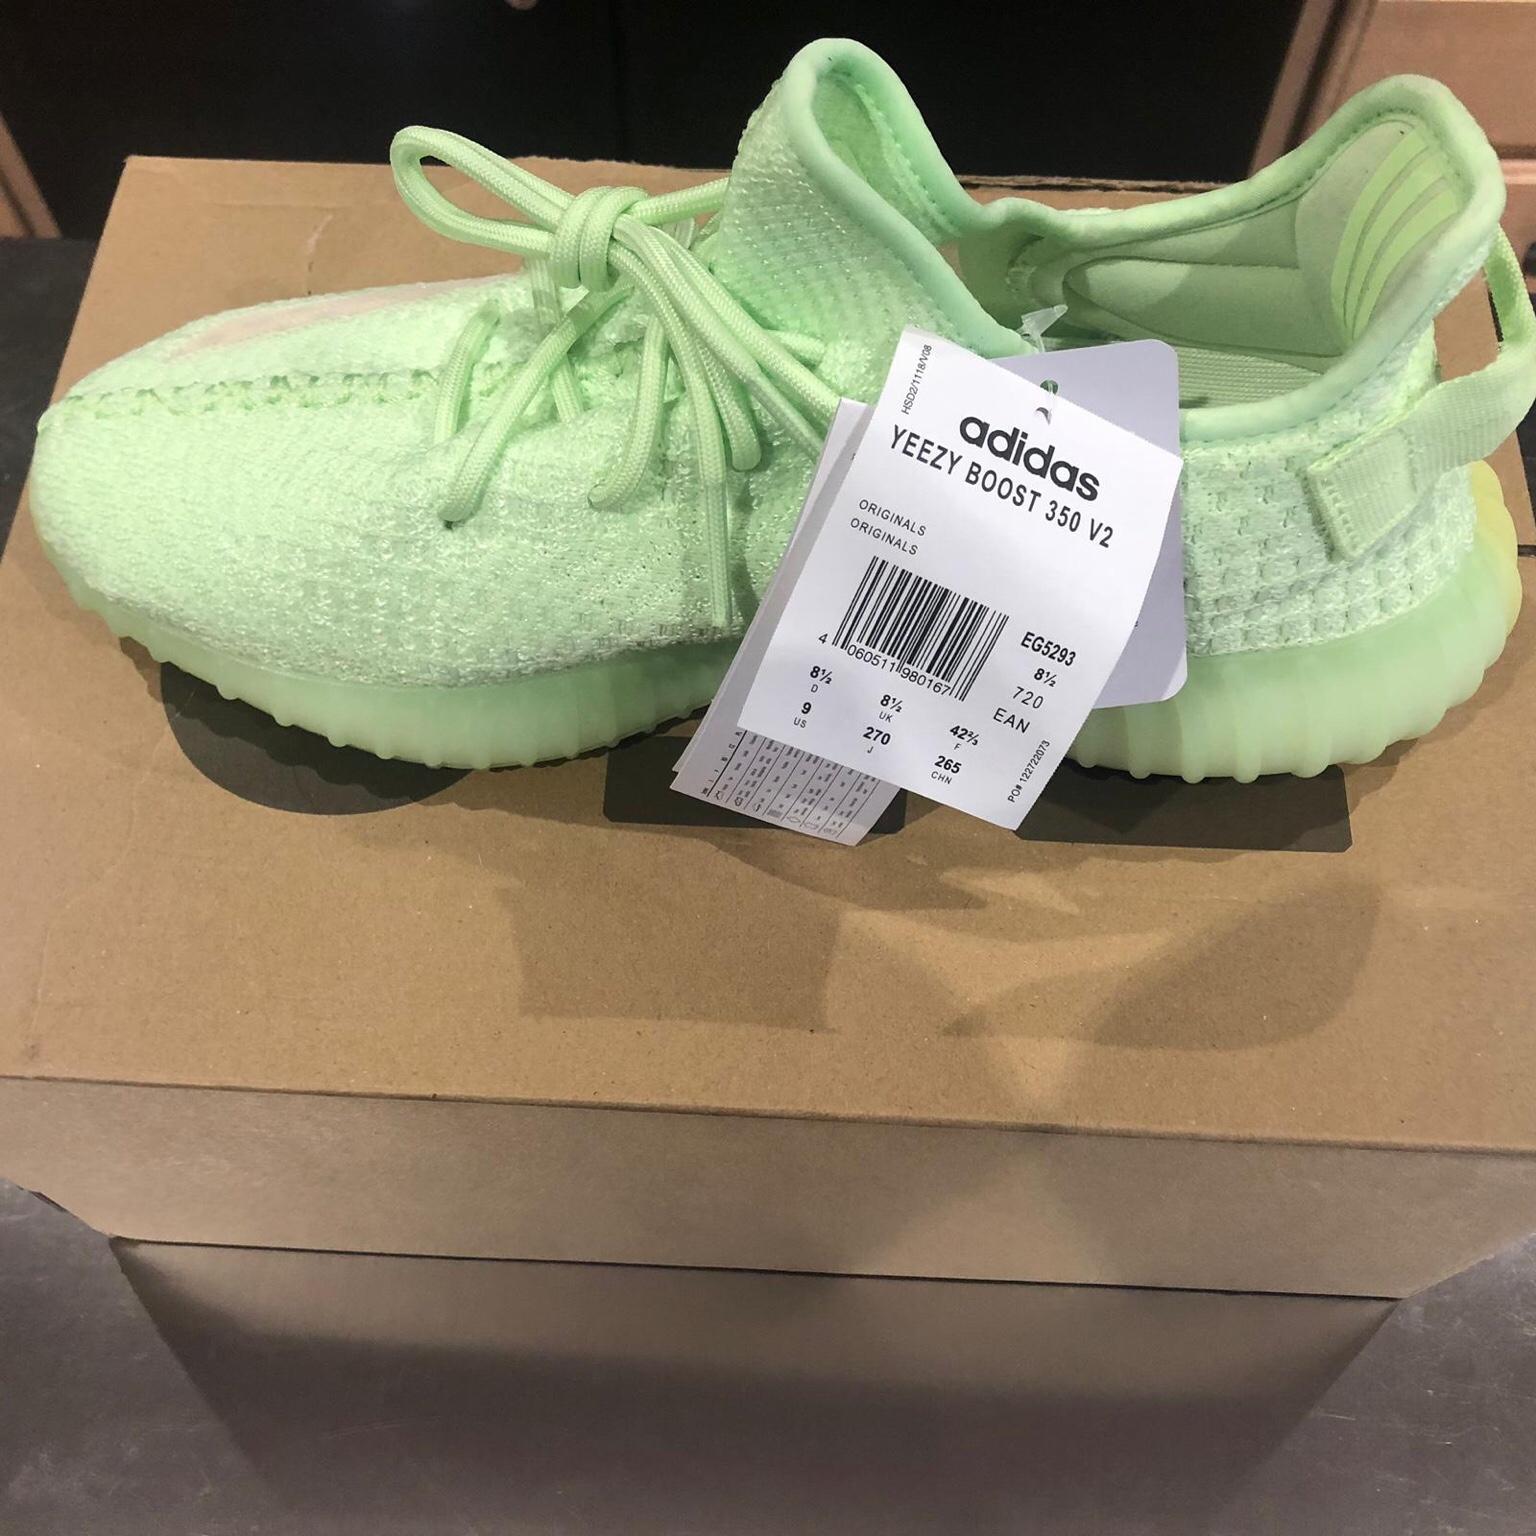 Adidas Yeezy Boost 350 V5 size 8 in 